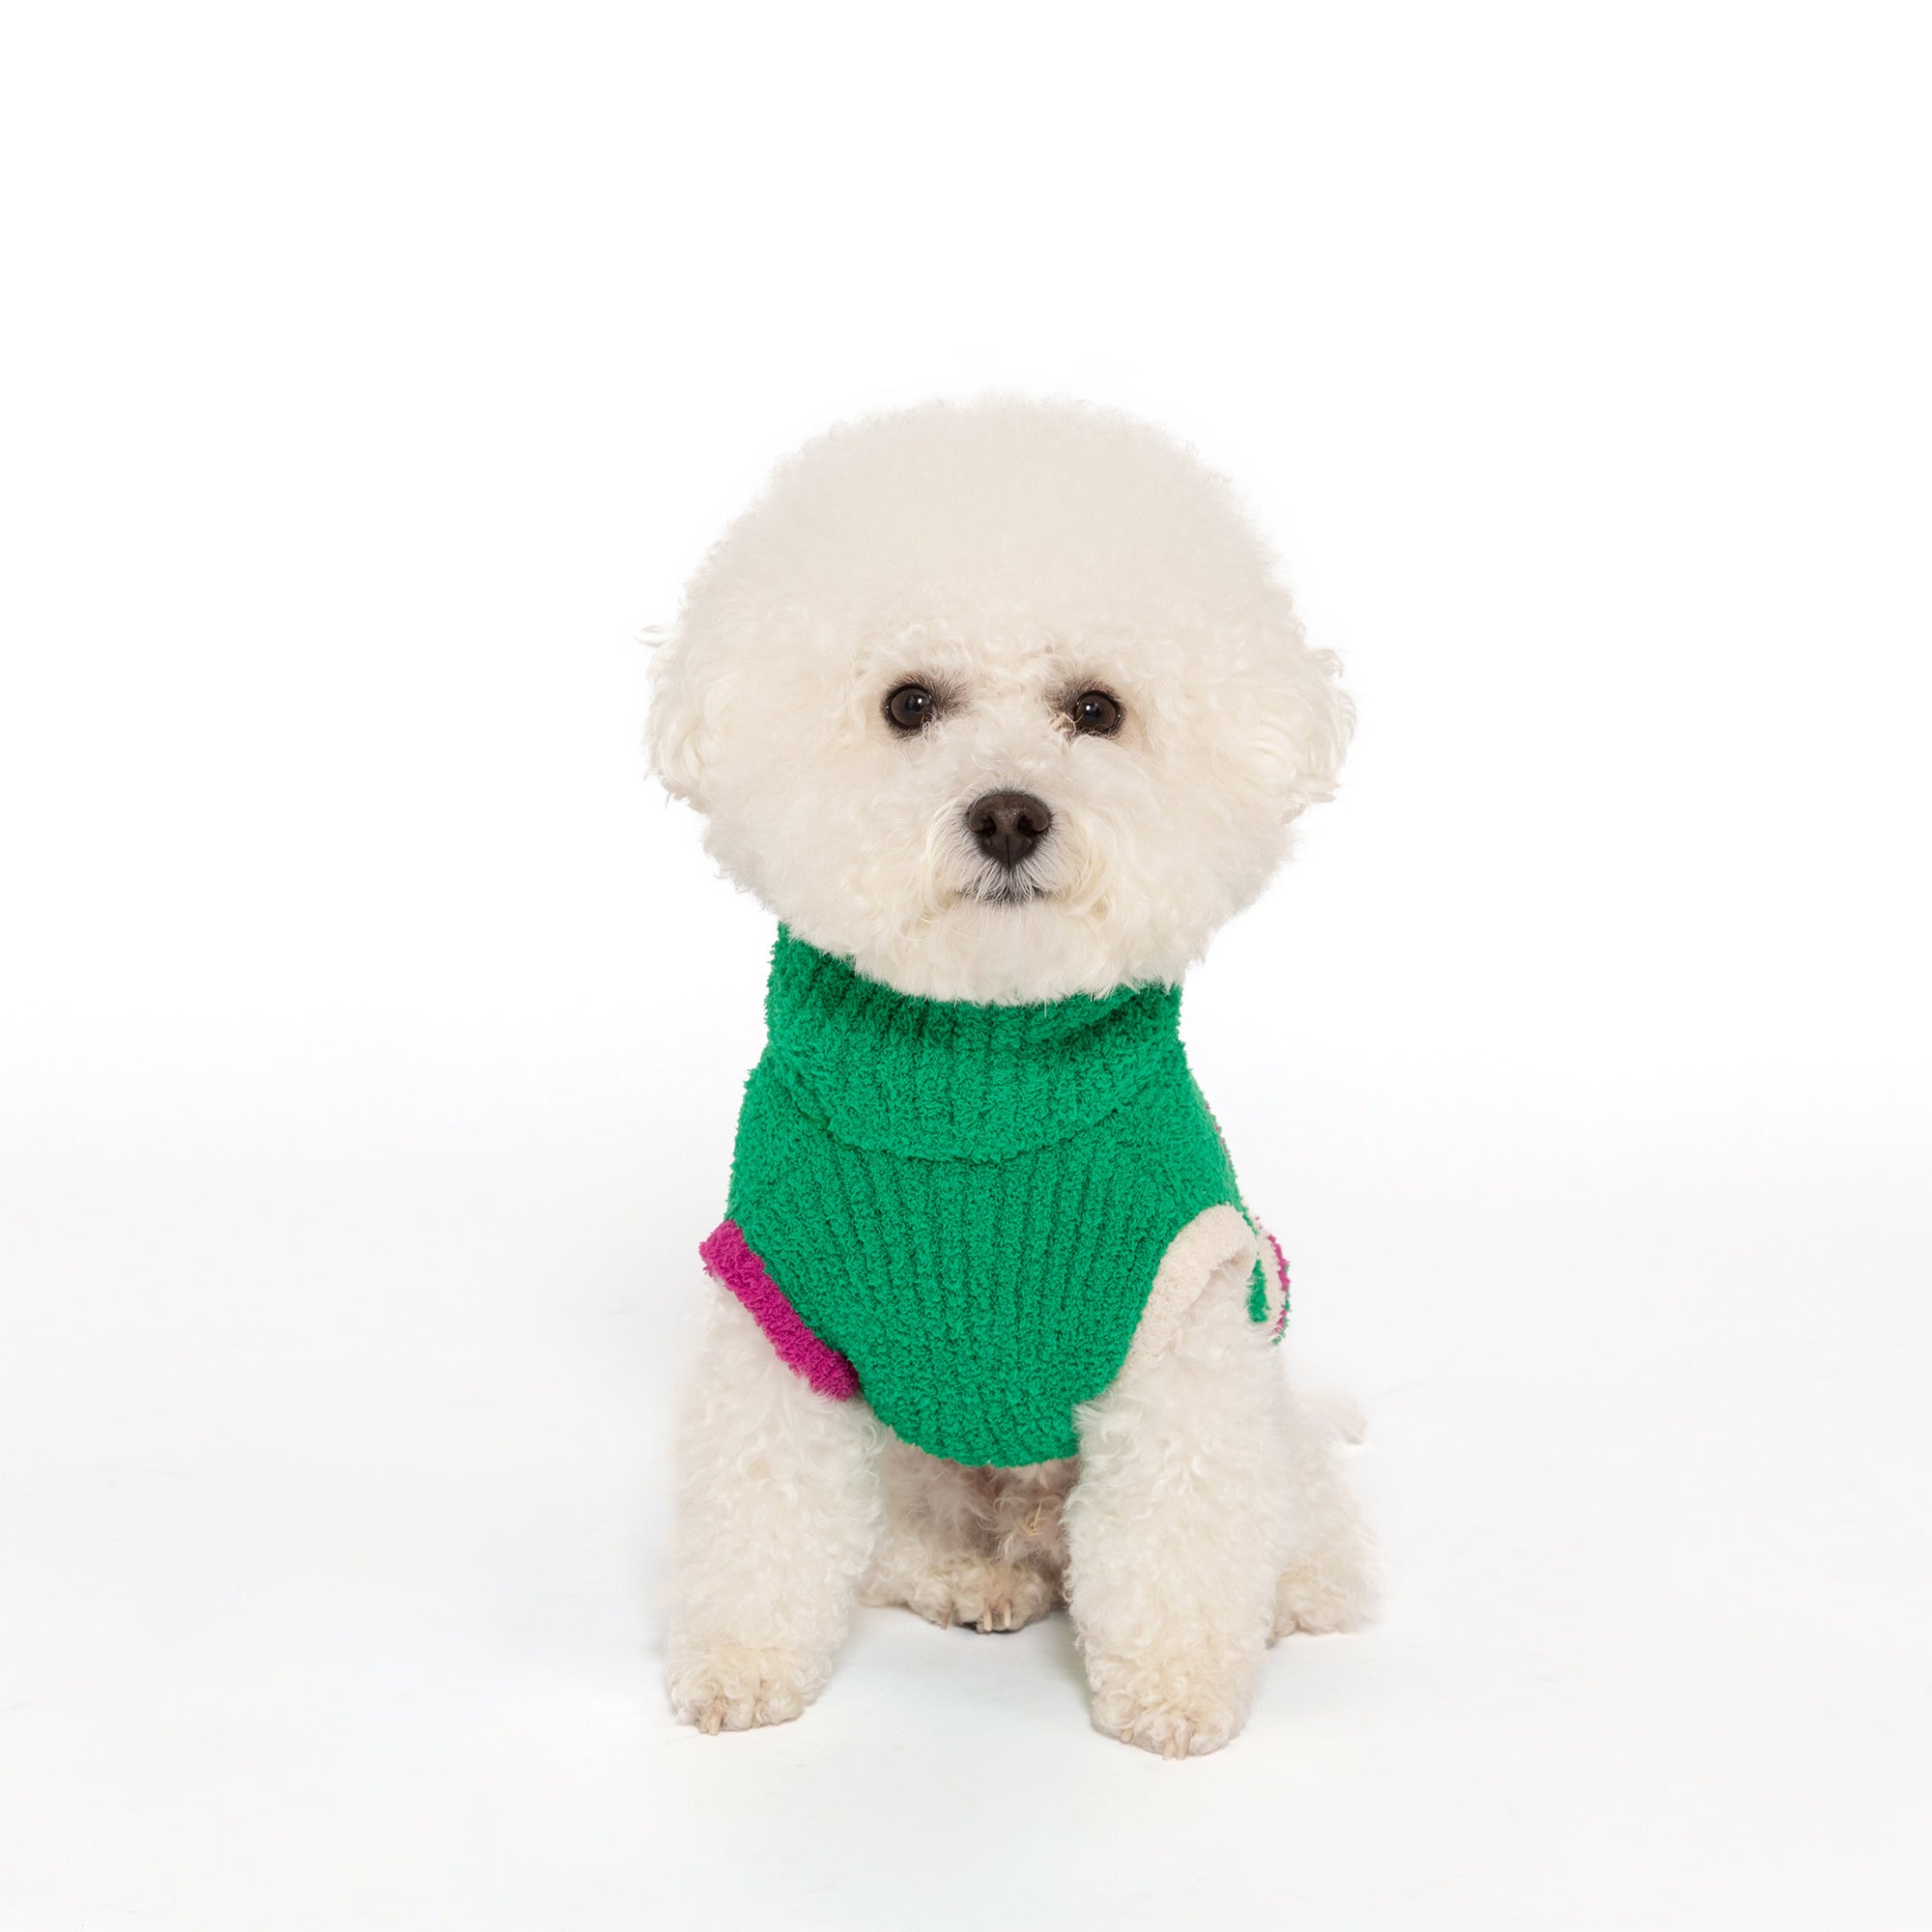  A small white dog wearing a bright green sweater with a pink trim, the text "Uniquely You" patterned on the back, sitting against a plain background.